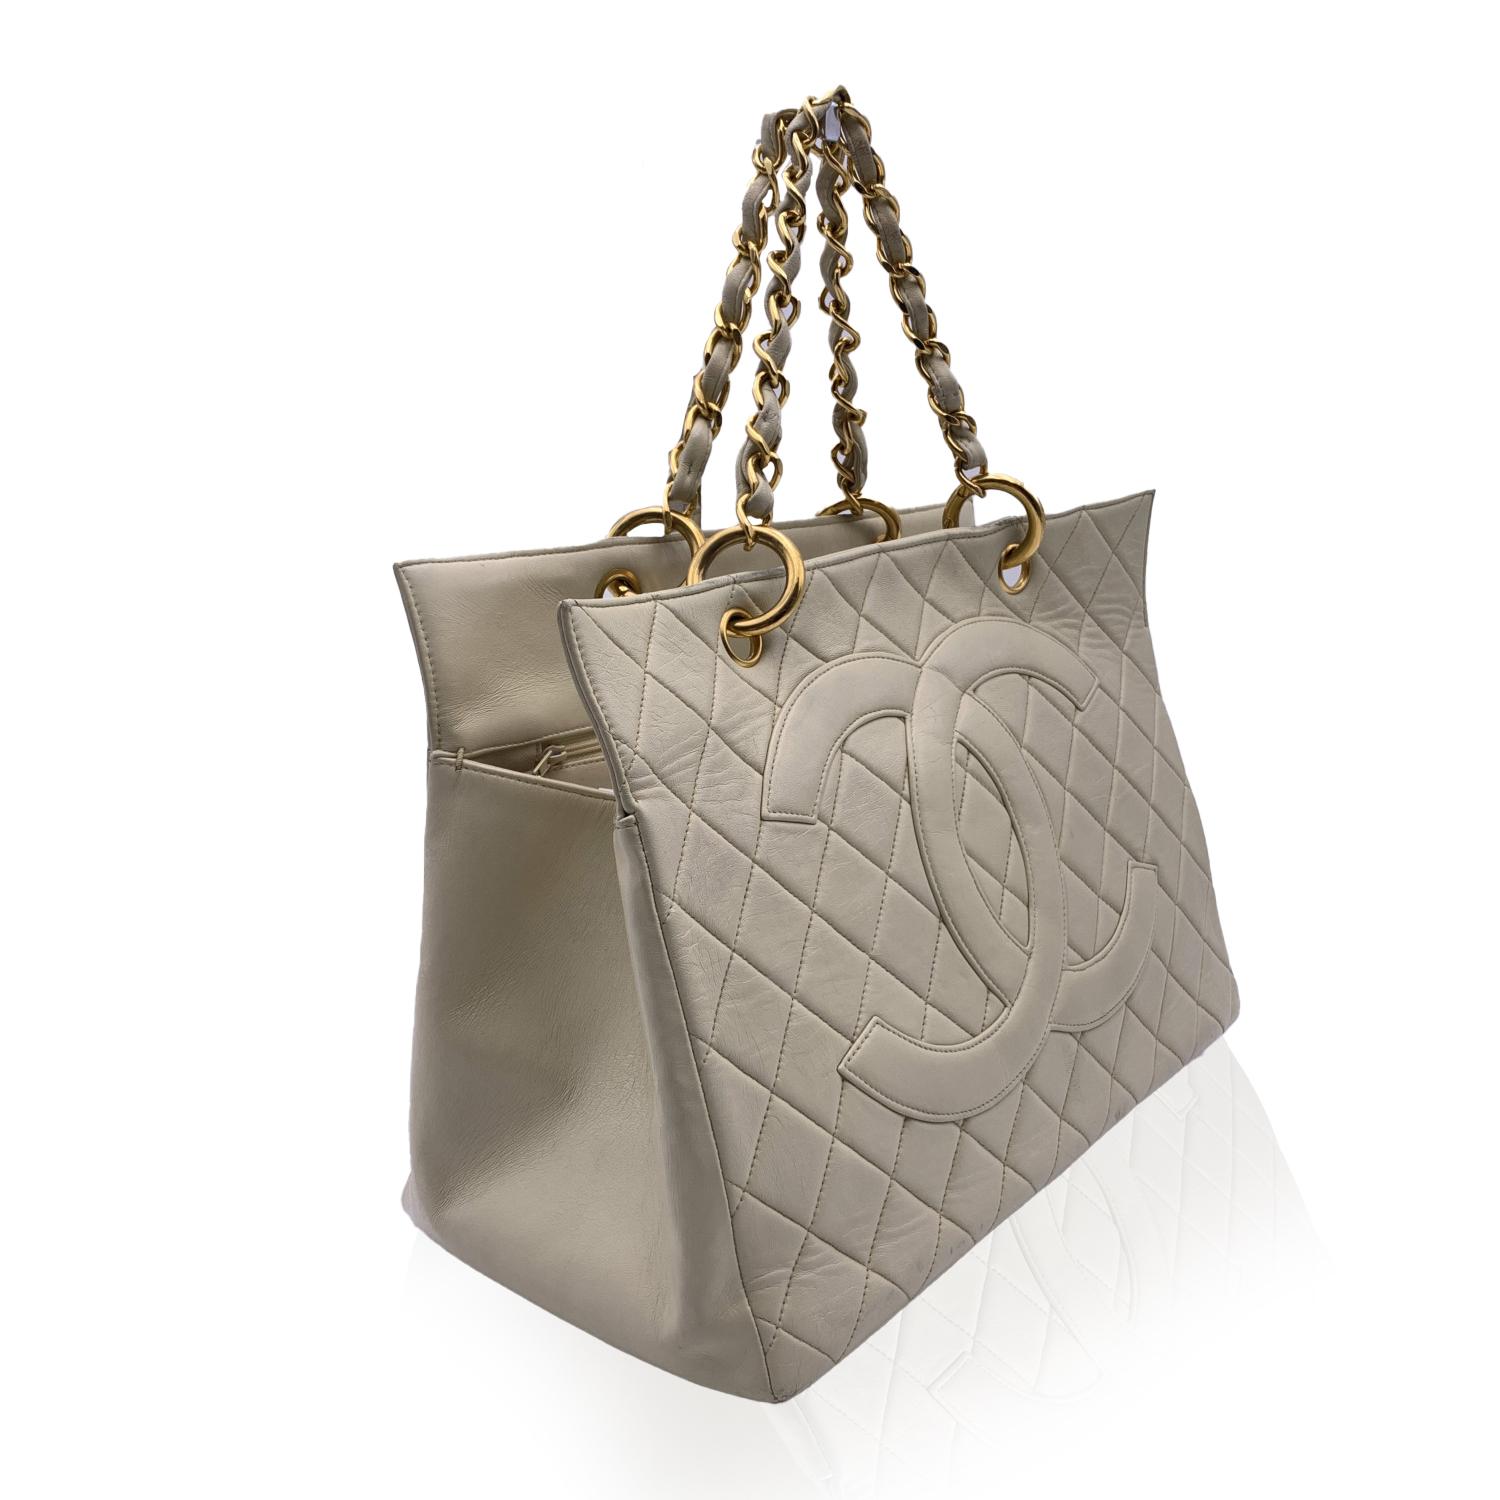 Women's Chanel Vintage Beige Quilted Leather GST 1997 Grand Shopping Tote